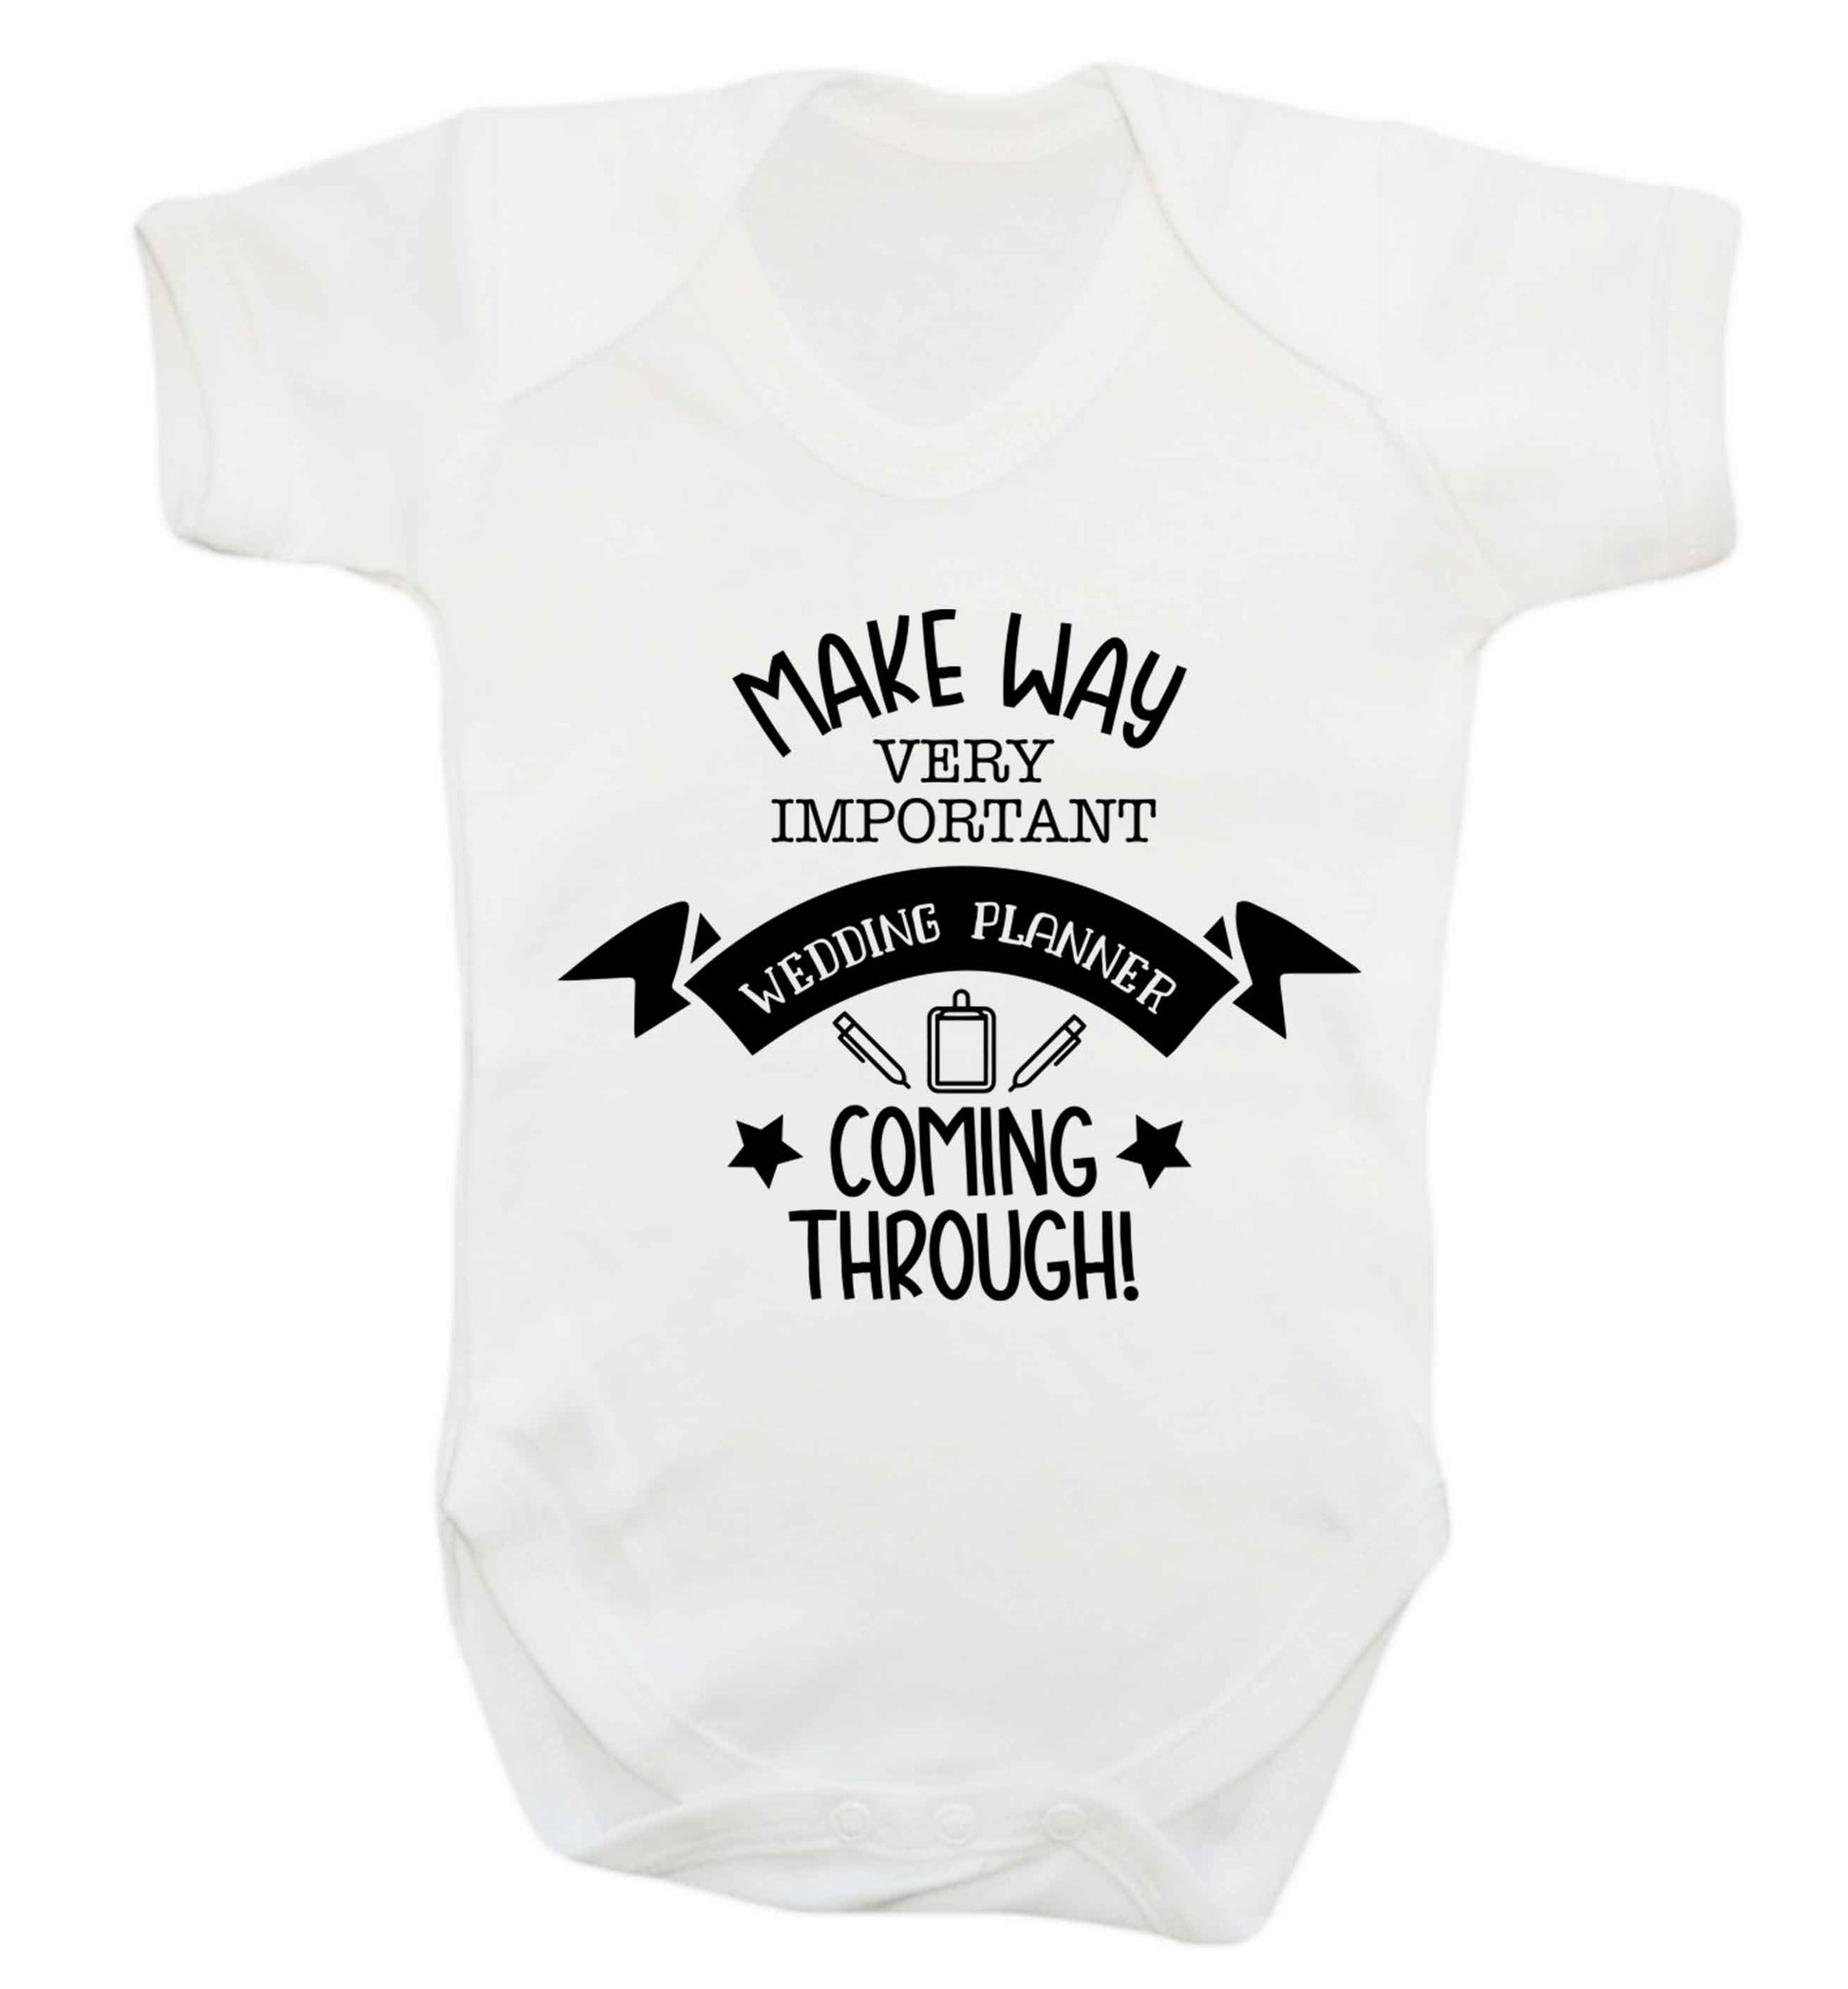 Make way very important wedding planner coming through Baby Vest white 18-24 months